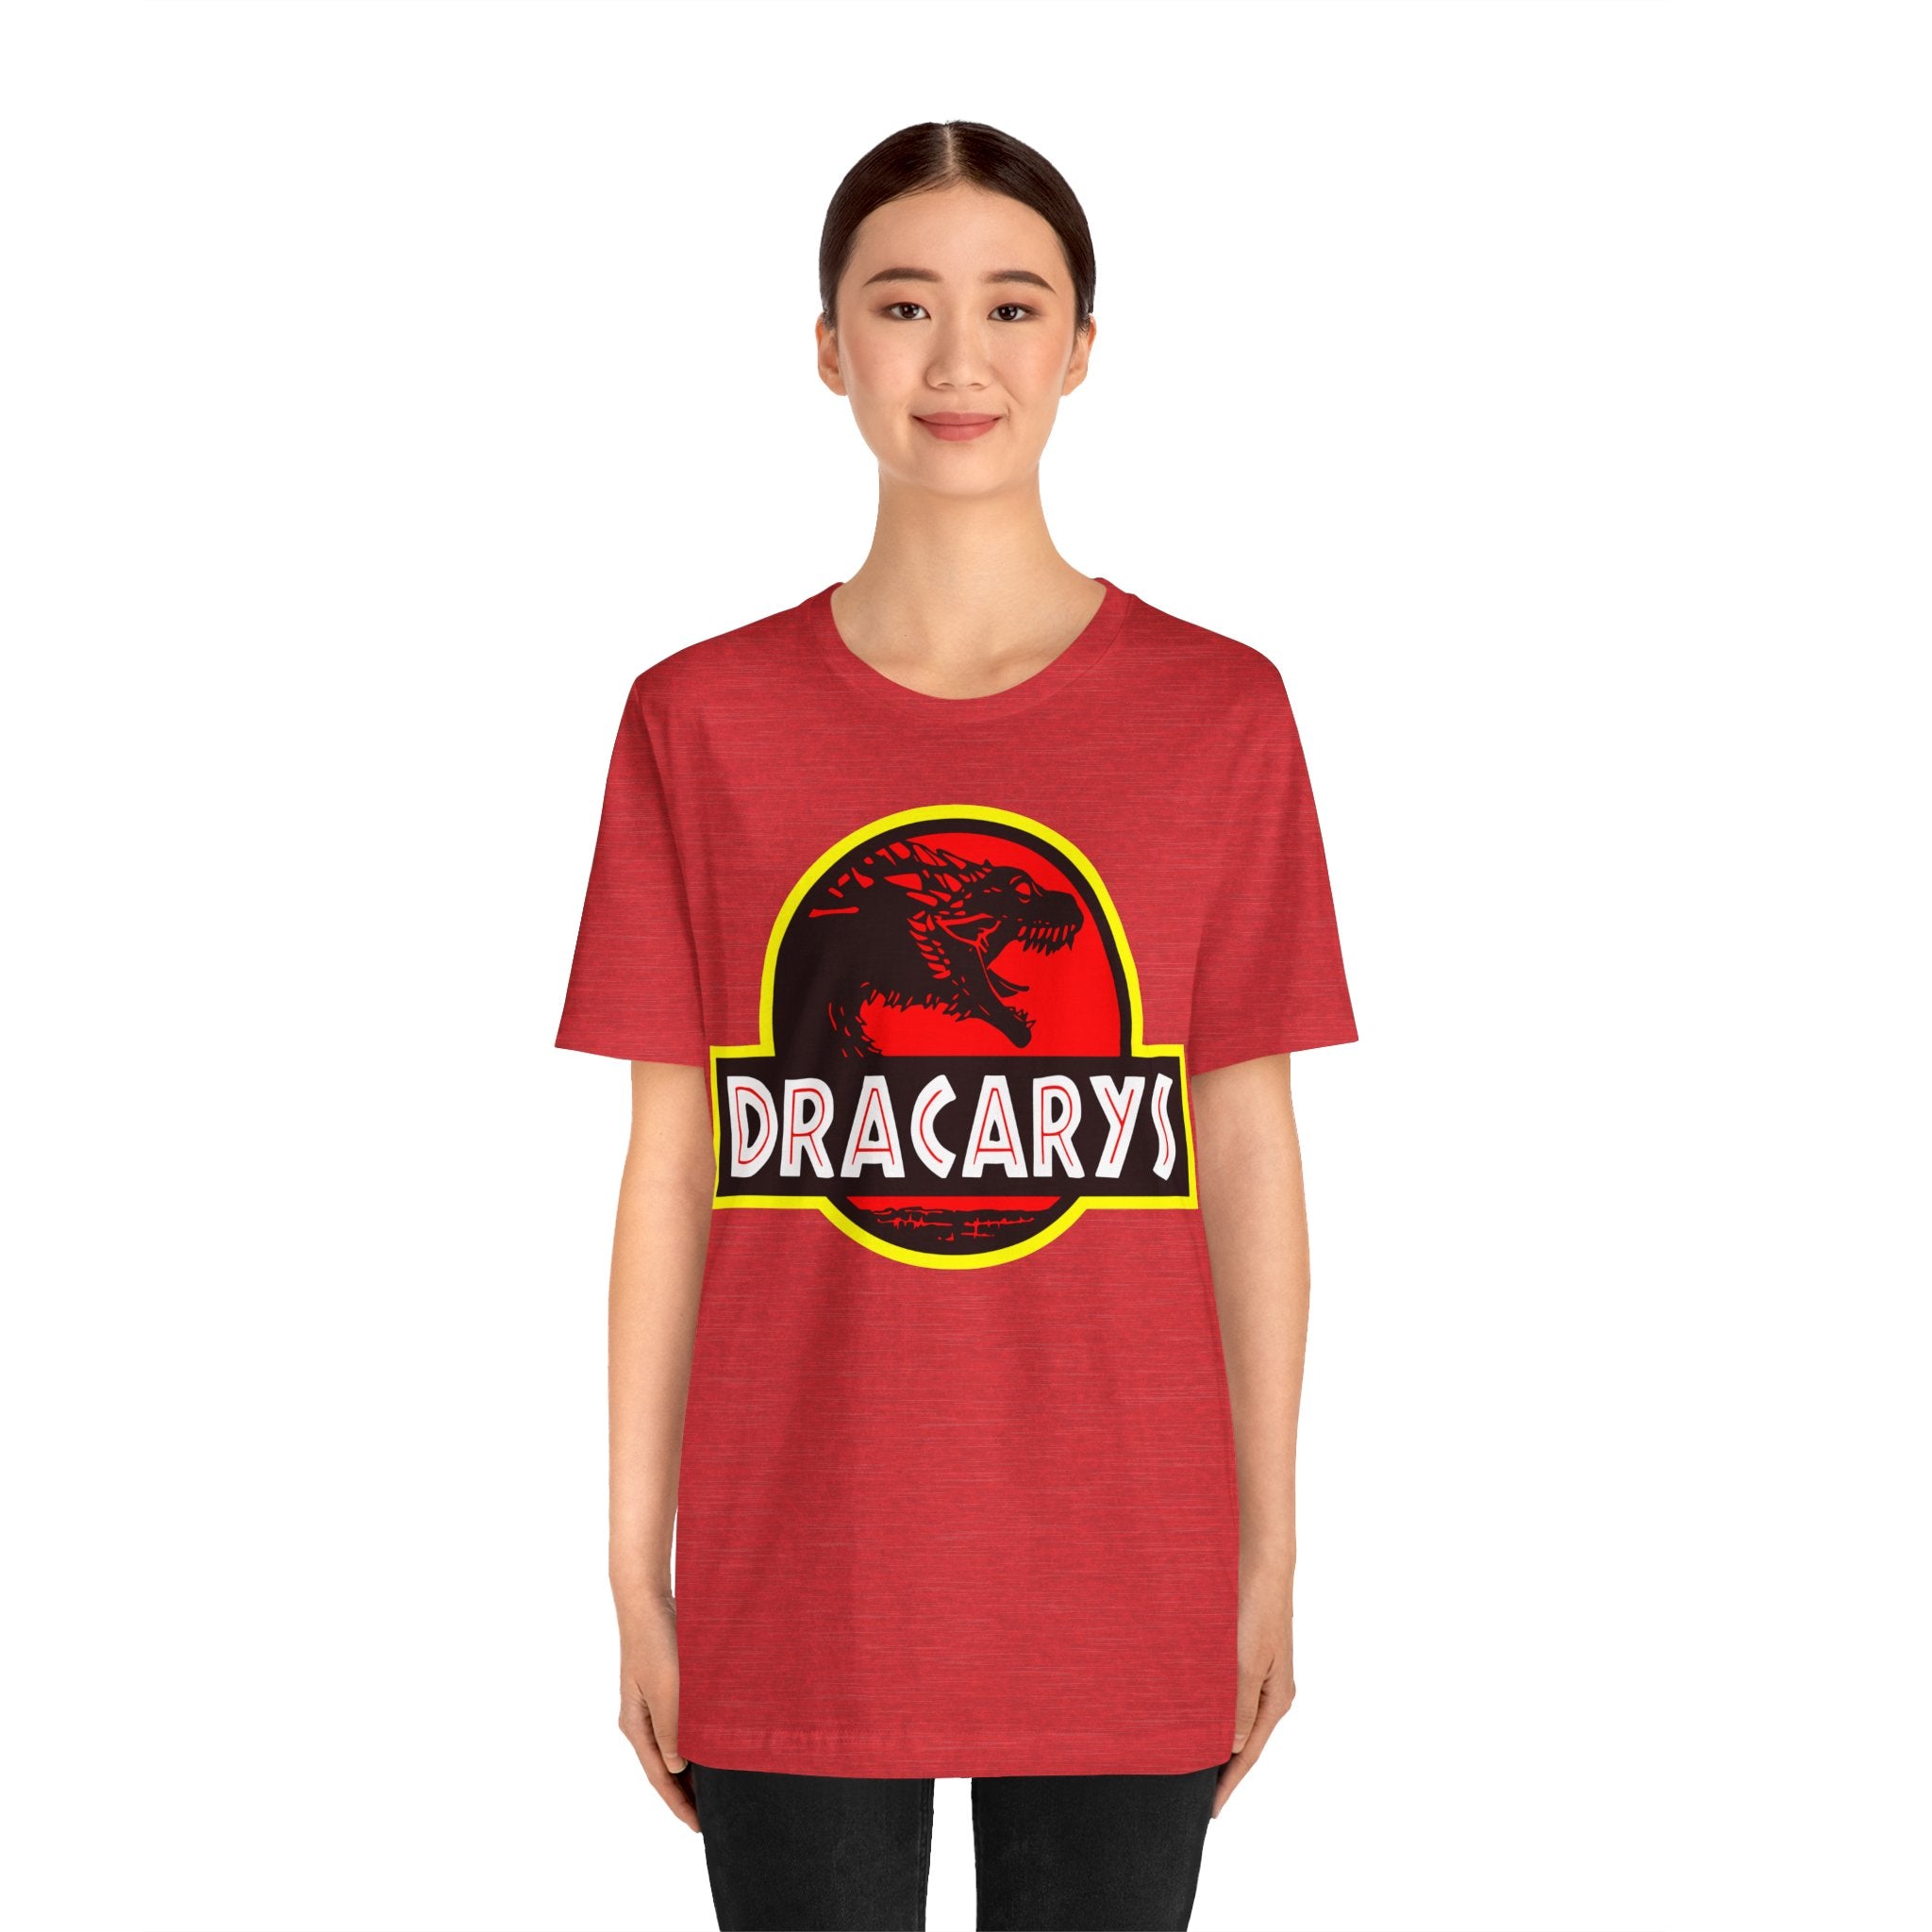 A young woman wearing a red Dracarys T-Shirt with a dragon emblem design stands facing forward.